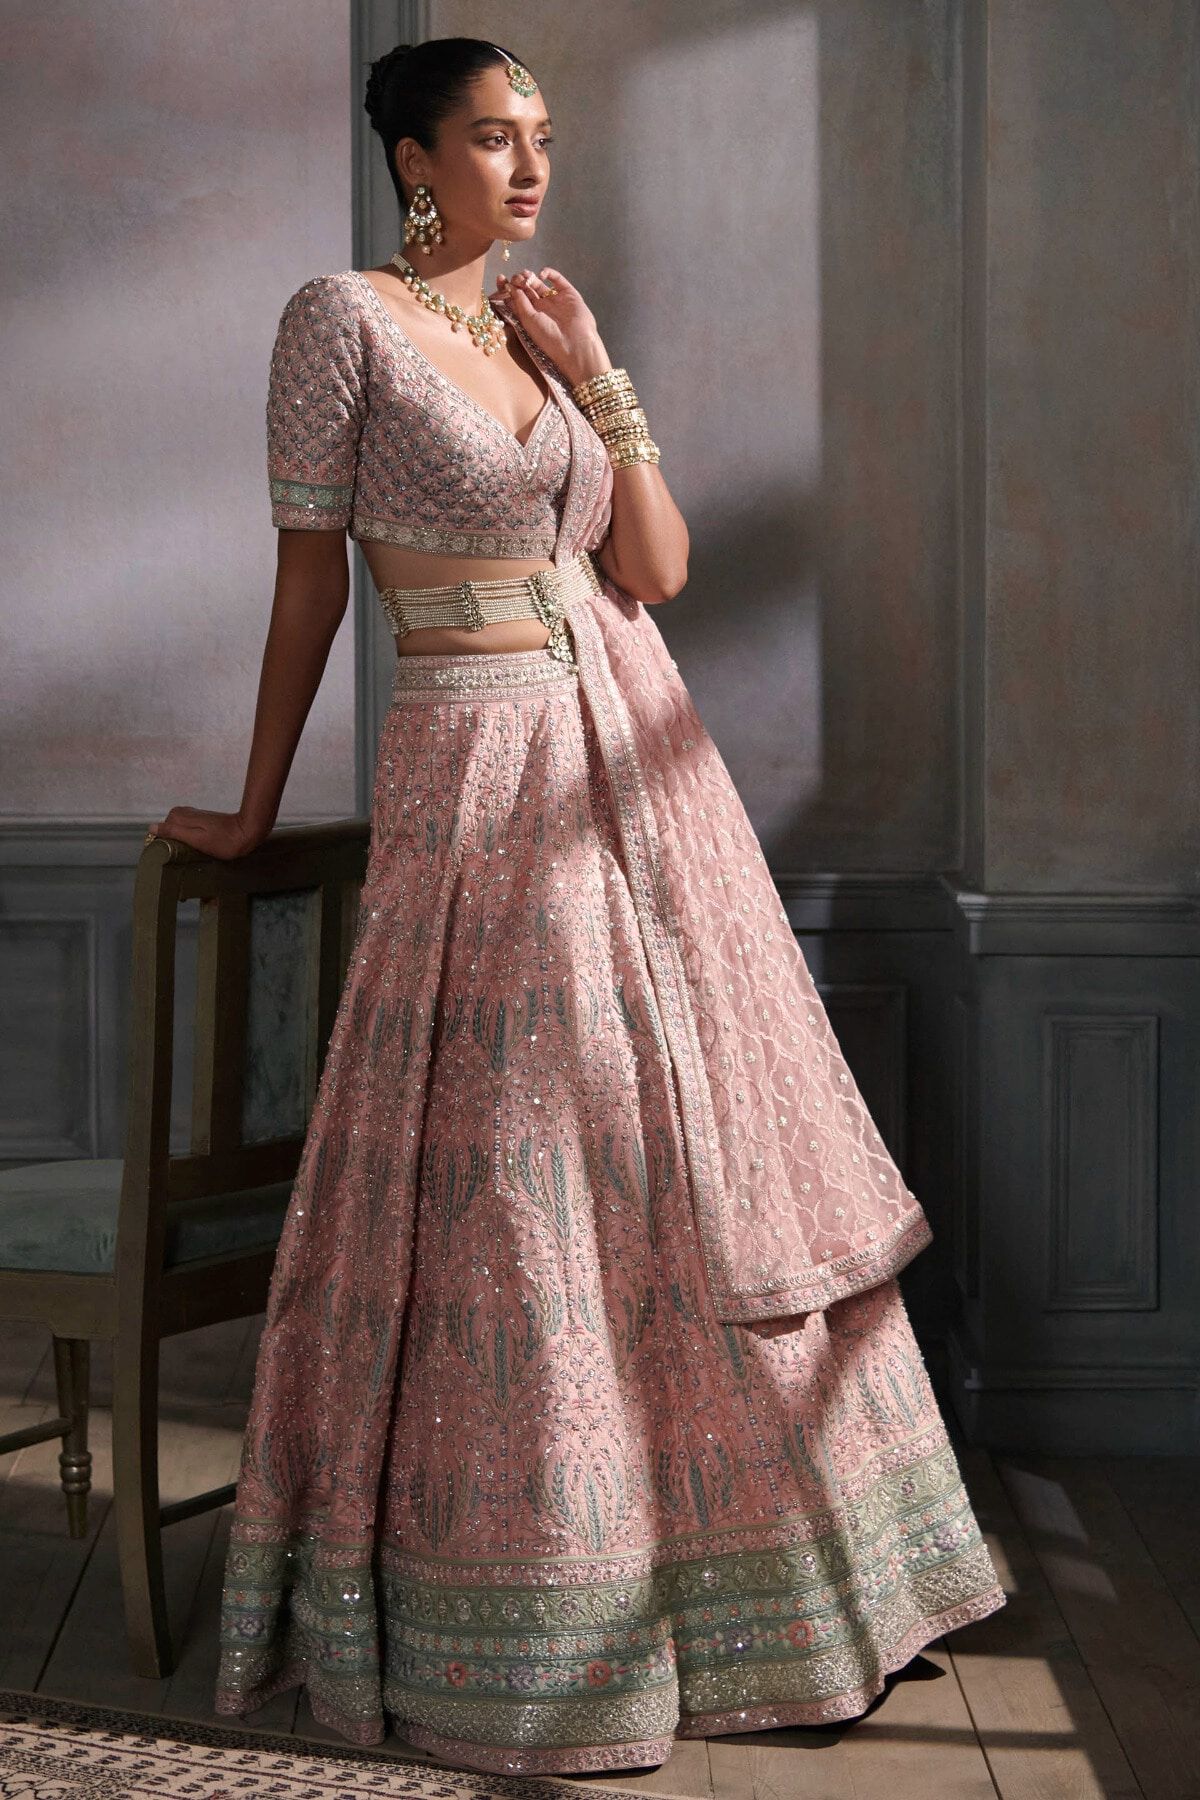 Anita Dongre Gowns  Indian Wedding Designer Gowns by Anita Dongre